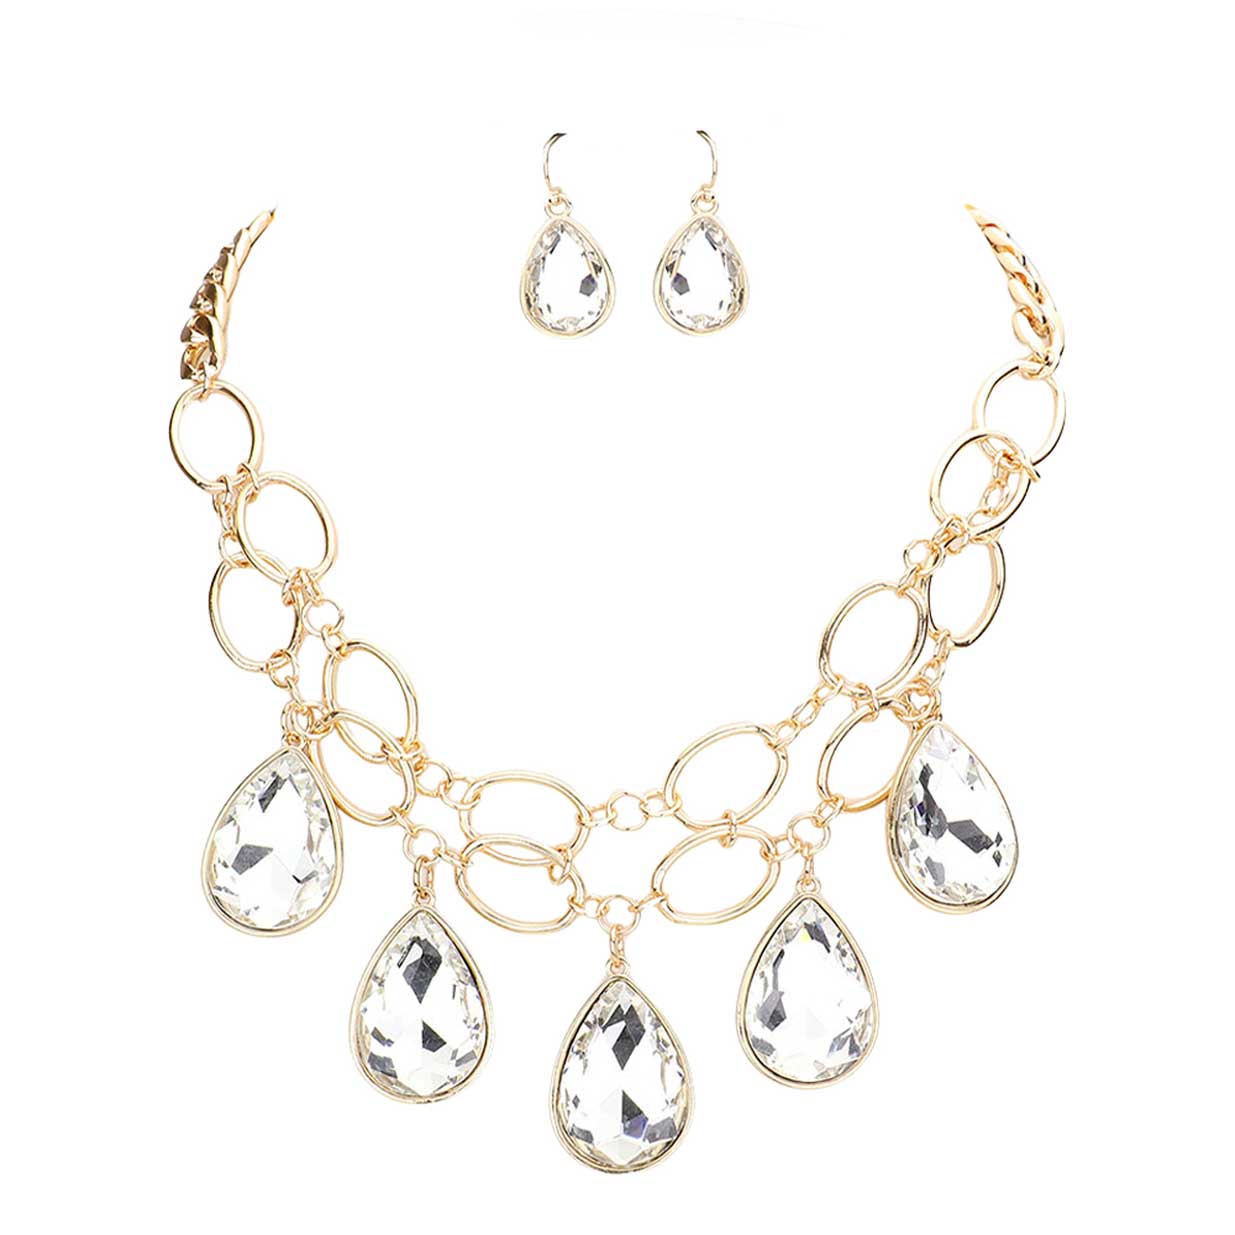 Gold Teardrop Stone Accented Open Metal Oval Link Evening Necklace, this gorgeous jewelry set will show your class on any special occasion. The elegance of these stones goes unmatched, great for wearing at a party! stunning jewelry set will sparkle all night long making you shine like a diamond on special occasions. Perfect jewelry to enhance your look and for wearing at parties, weddings, date nights, or any special event.